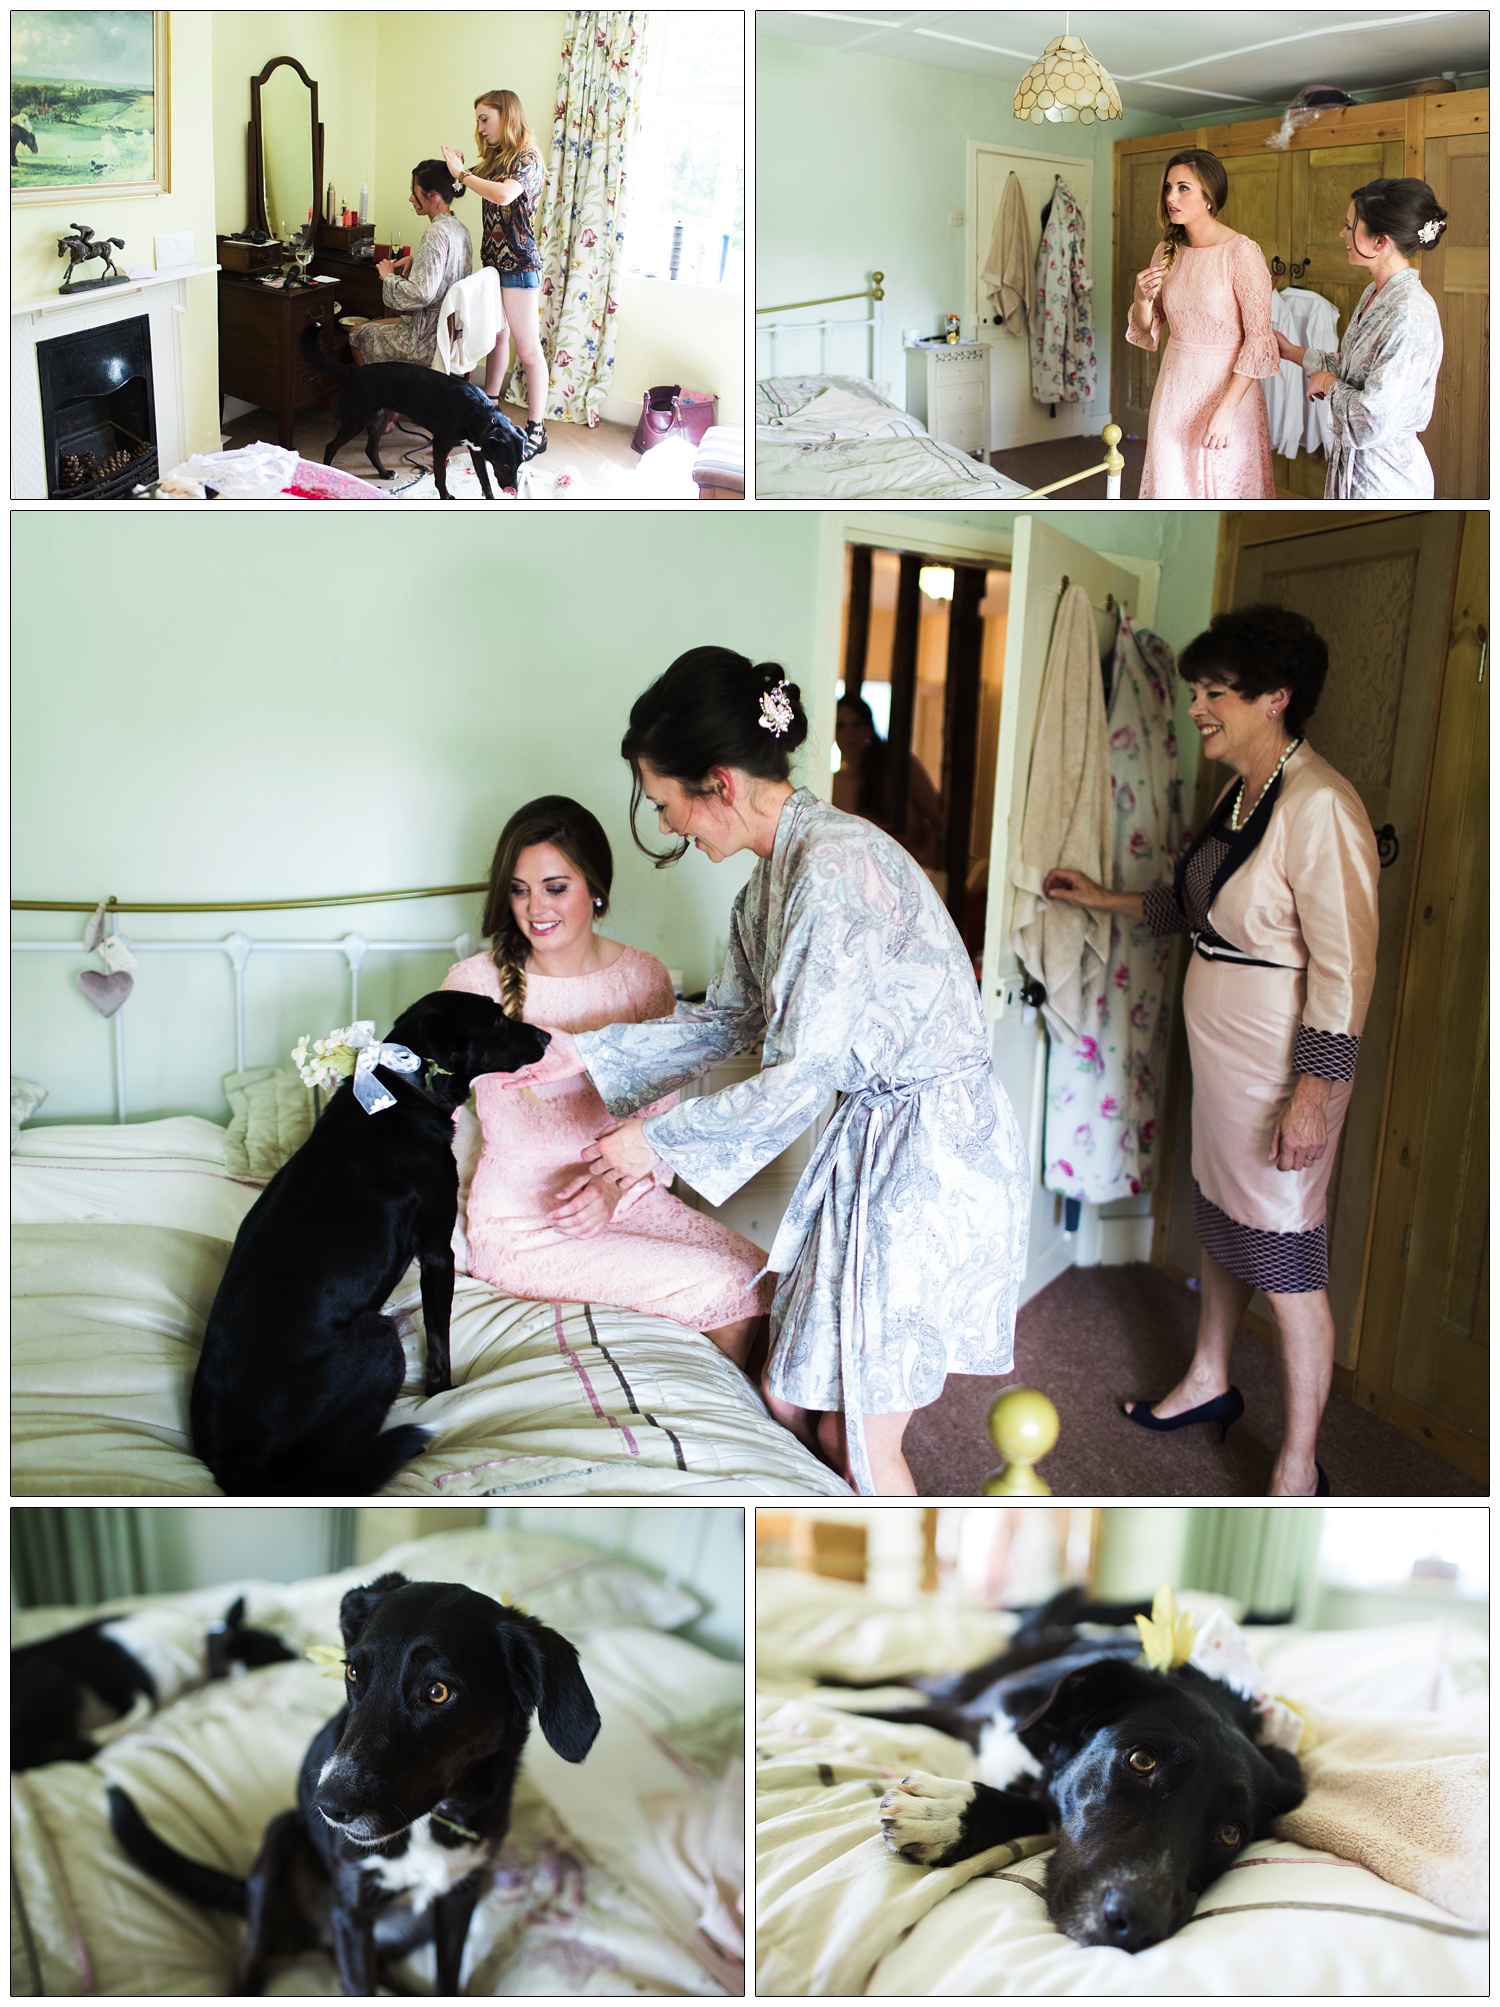 Bride, sister and mum are in the bedroom getting ready for a wedding. There is a black dog on the bed.